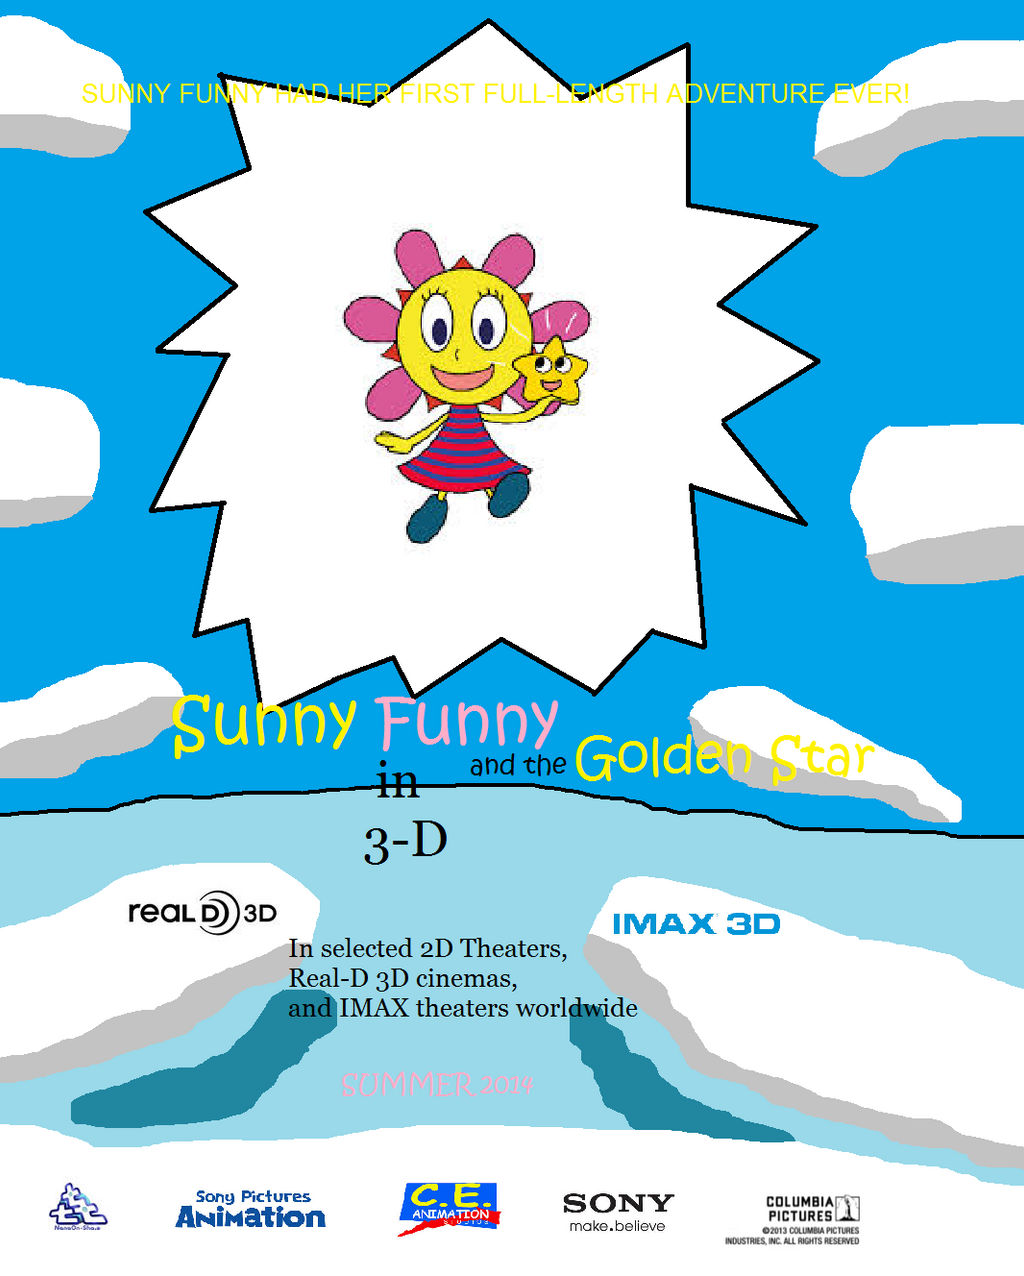 Sunny Funny and the Golden Star movie poster by RealMovieMaker9000 on  DeviantArt